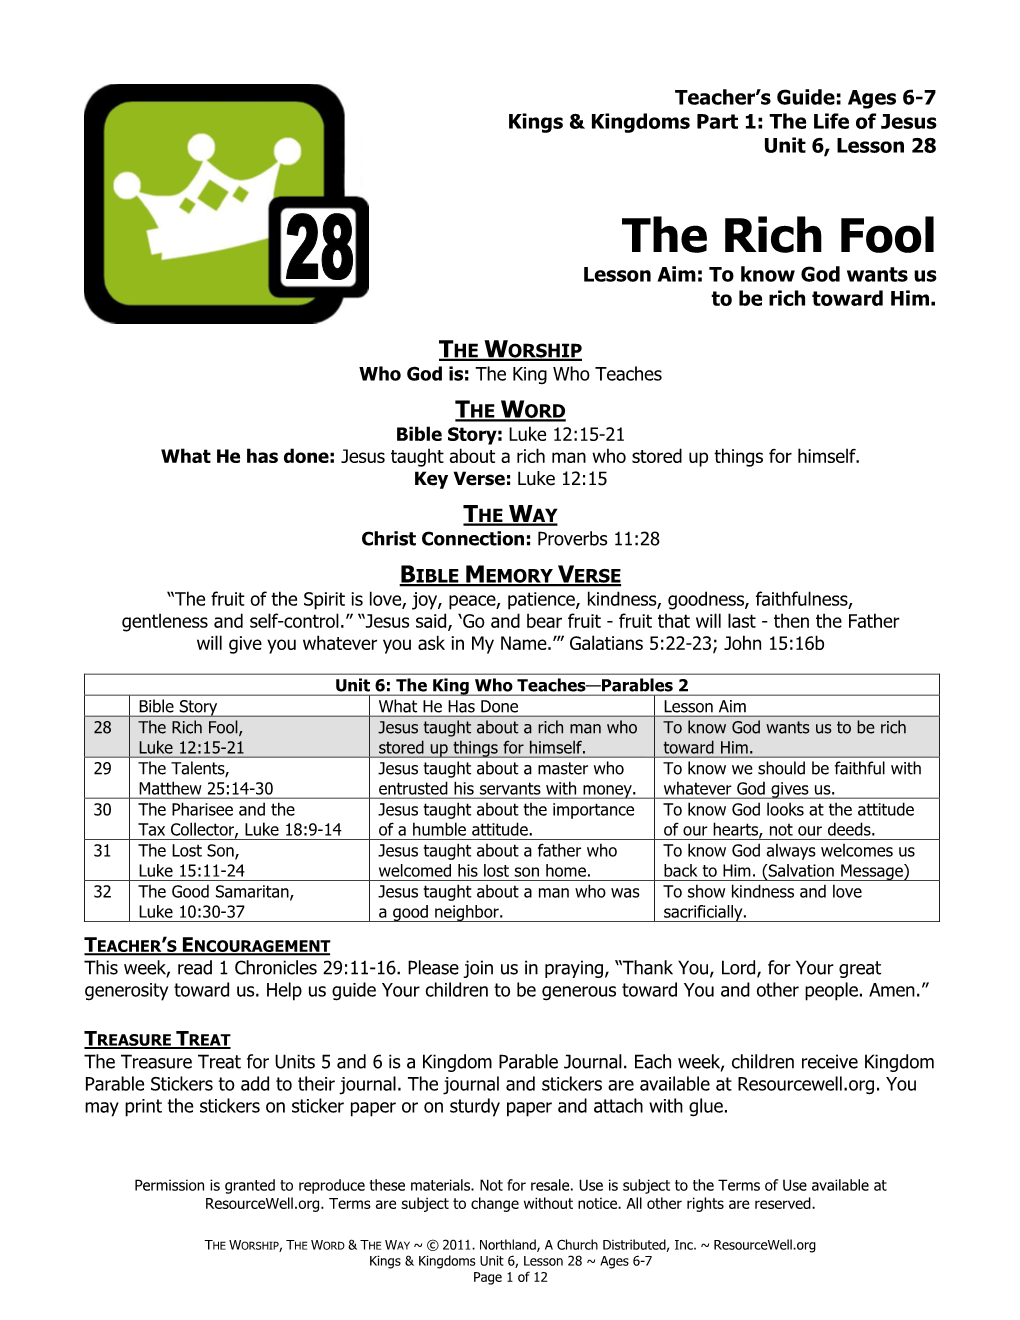 The Rich Fool Lesson Aim: to Know God Wants Us to Be Rich Toward Him